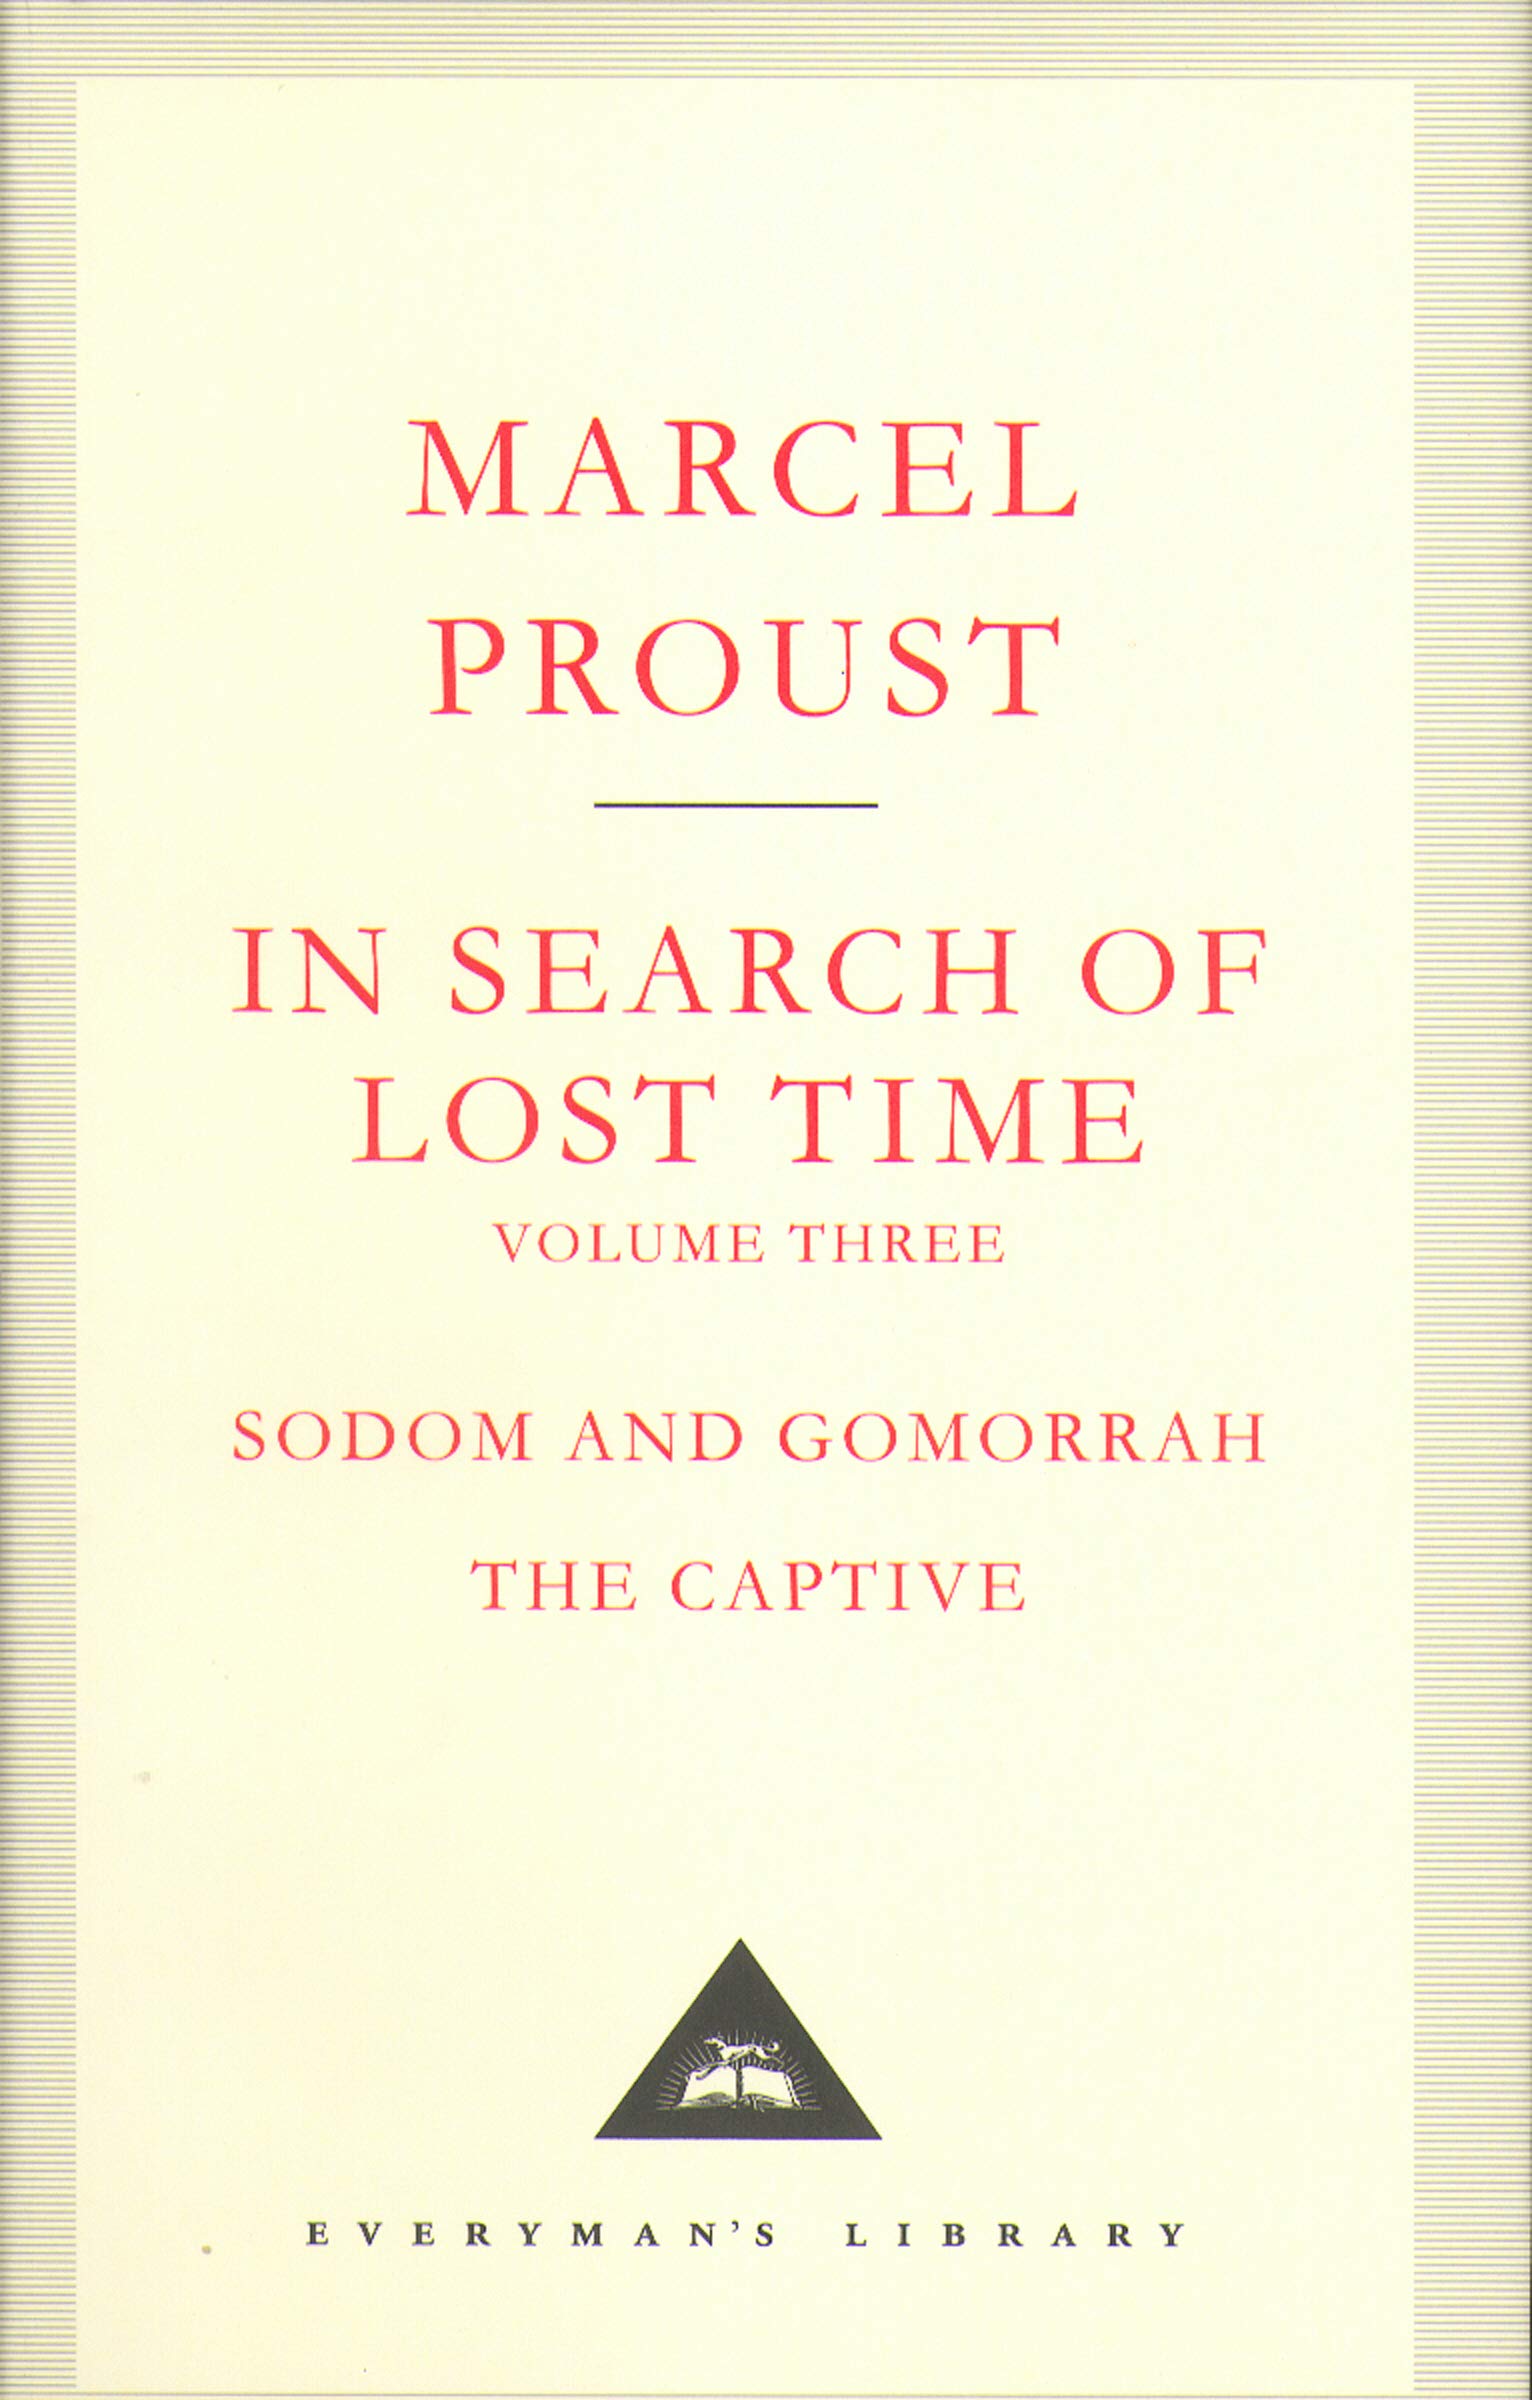 In Search of Lost Time. Sodom and Gomorrah. The Captive | Marcel Proust